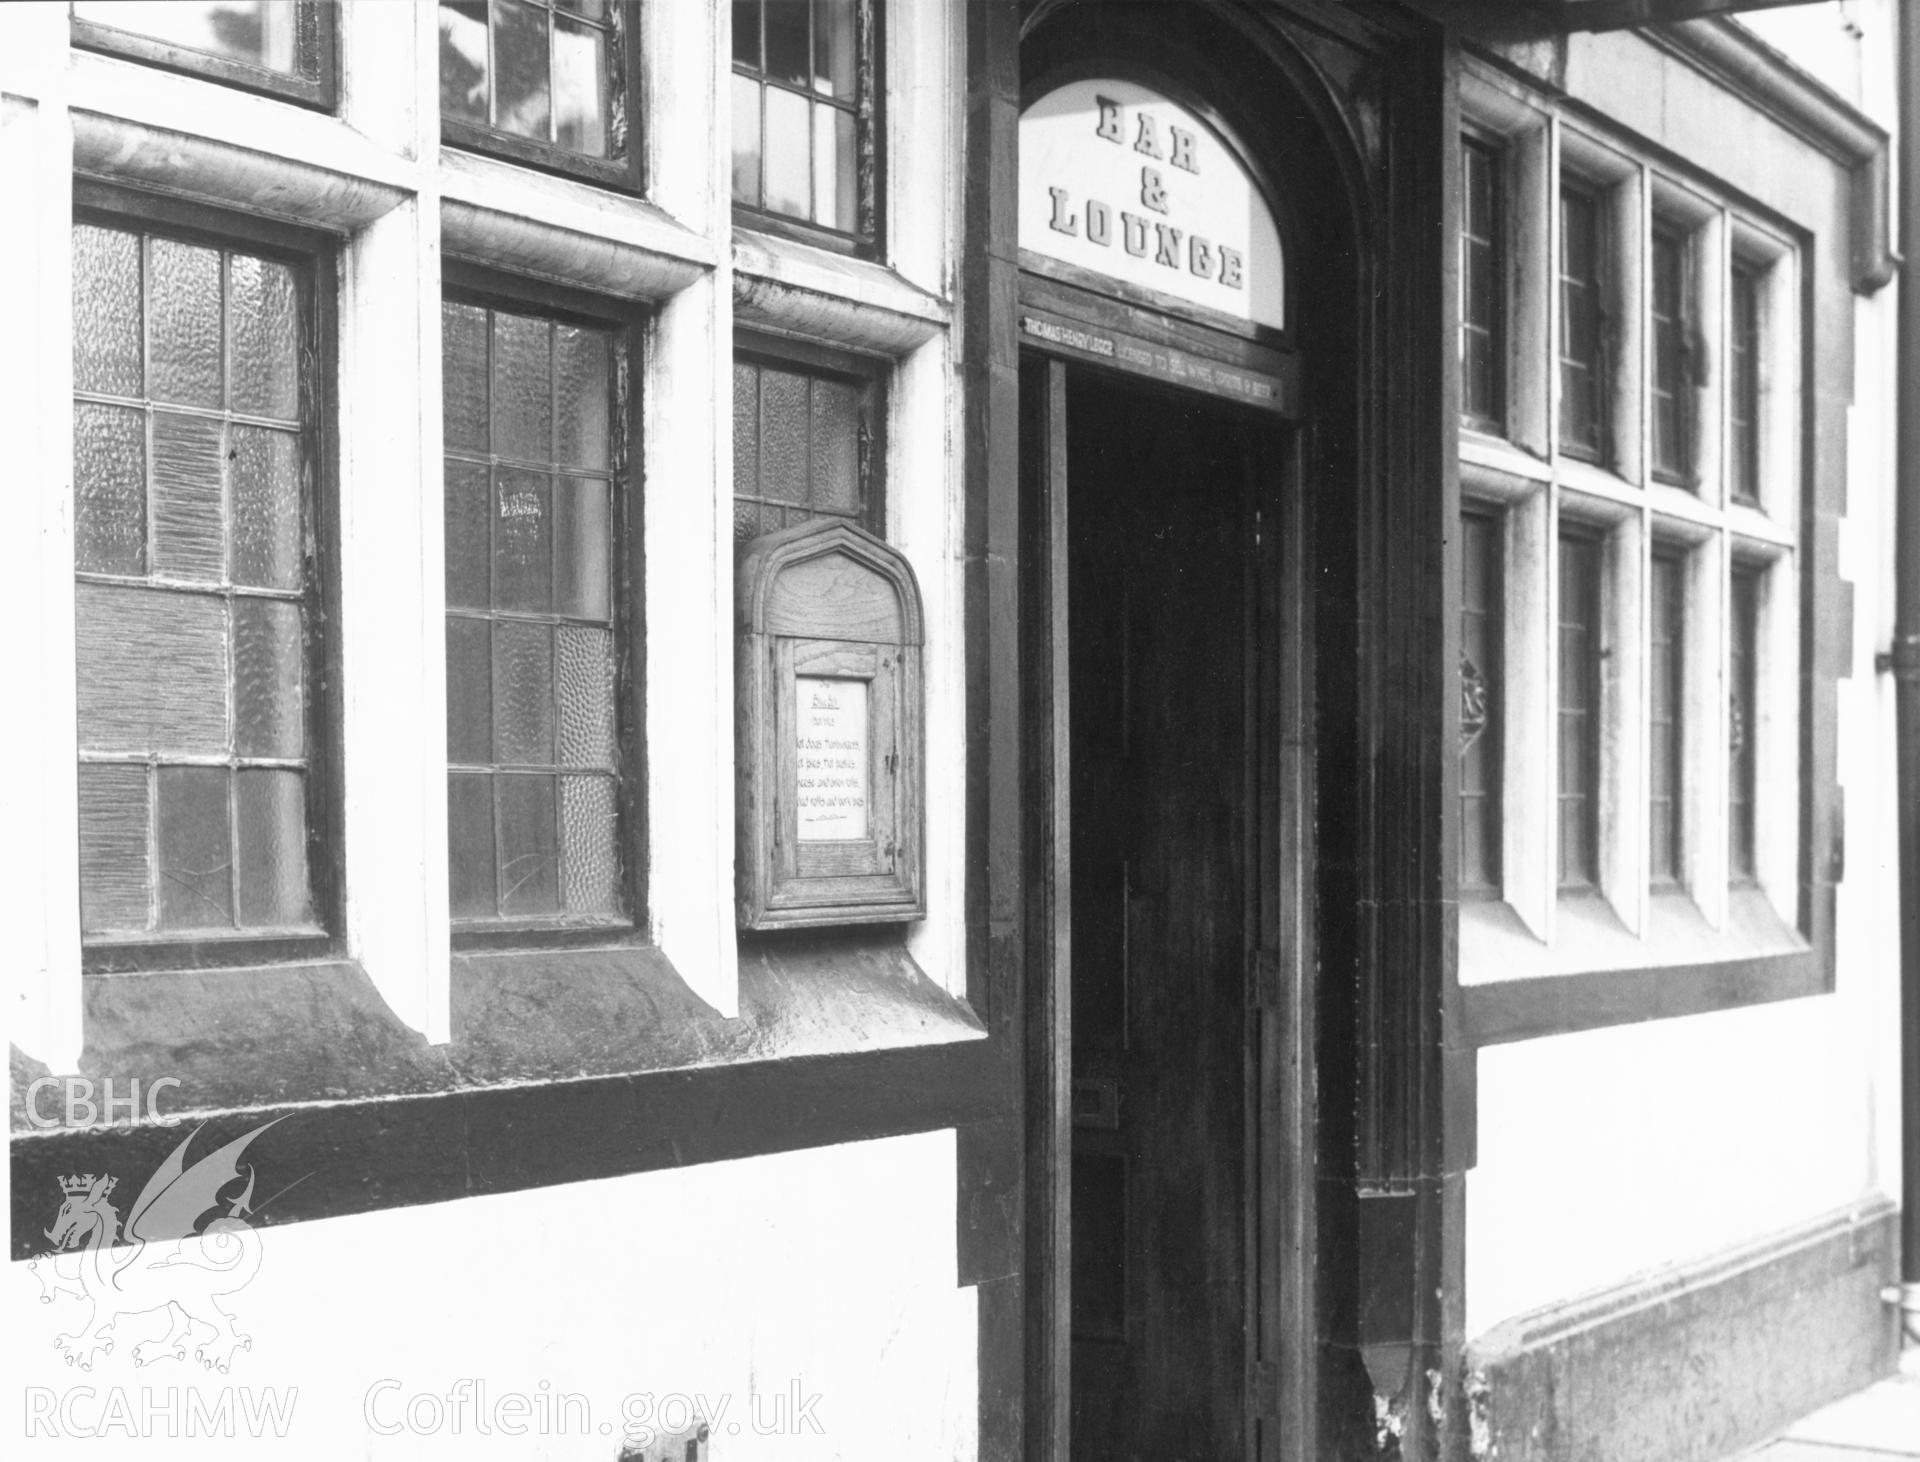 1 b/w print showing doorway of The Bluebell Public House, High Street, Cardiff; collated by the former Central Office of Information.